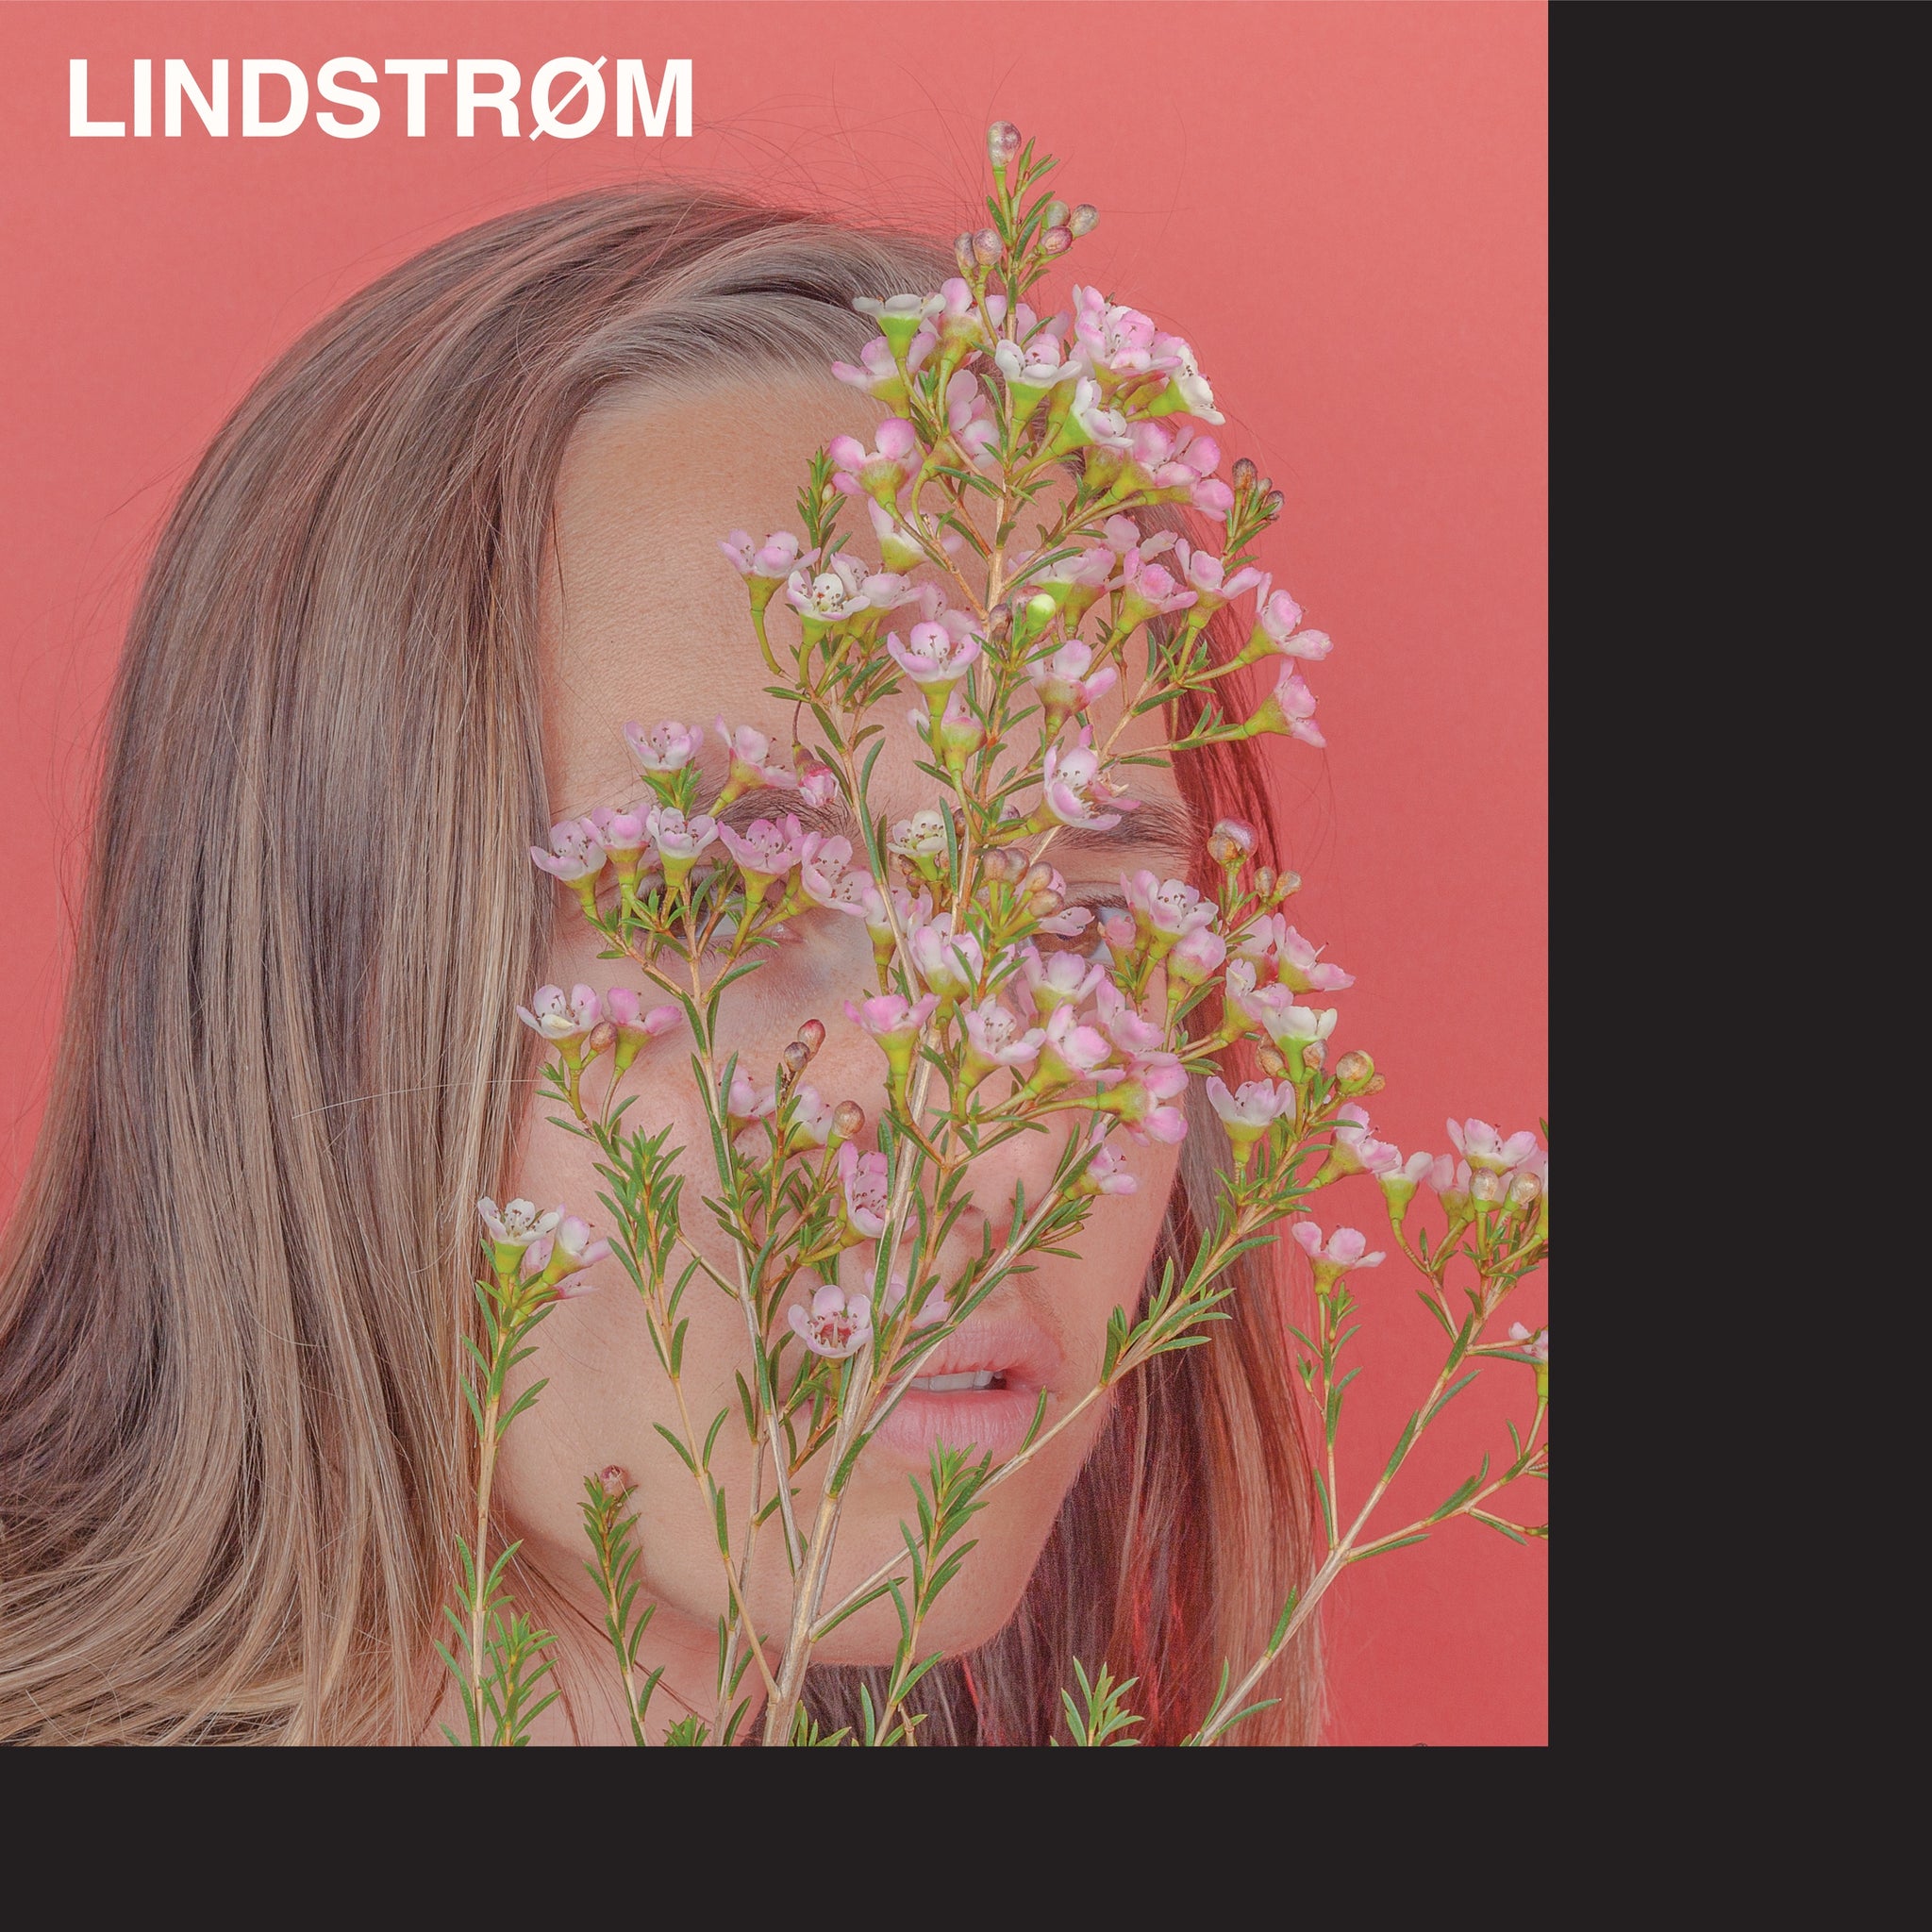 Lindstrøm ‎– It's Alright Between Us As It Is - New Vinyl LP Record 2017 Smalltown Supersound - Electronic / Pop / Nu-Disco